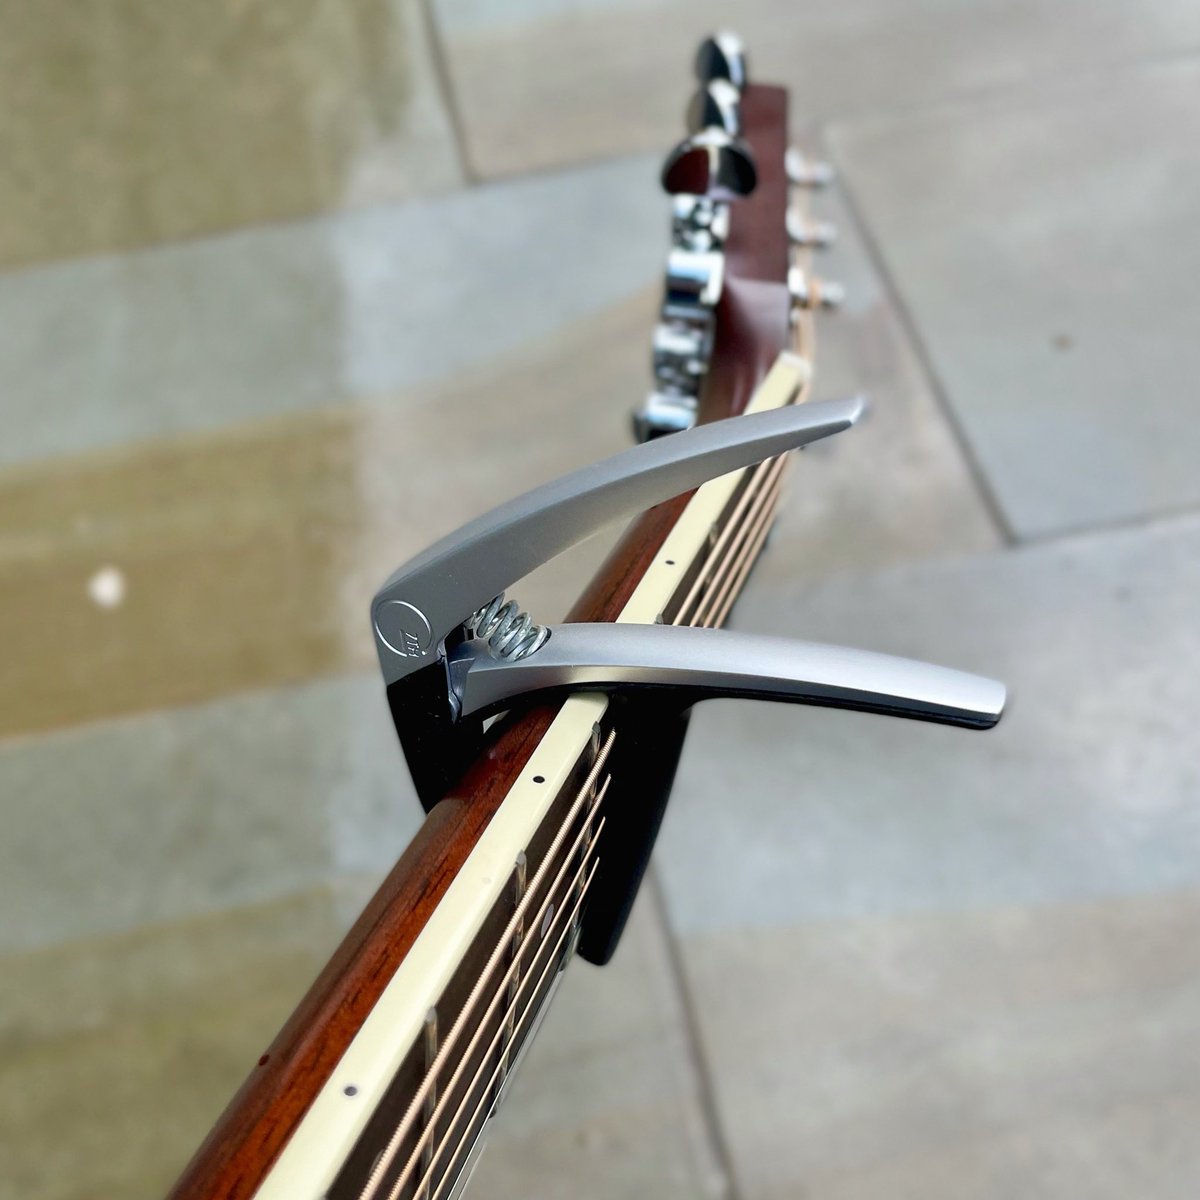 Fast, easy to use and carefully designed to greatly reduce the problems caused by excessive clamping force, the @G7thCapos Nashville is perfect for those who prefer the simplicity of a spring capo #G7thCapos #NashvilleCapo #springcapo